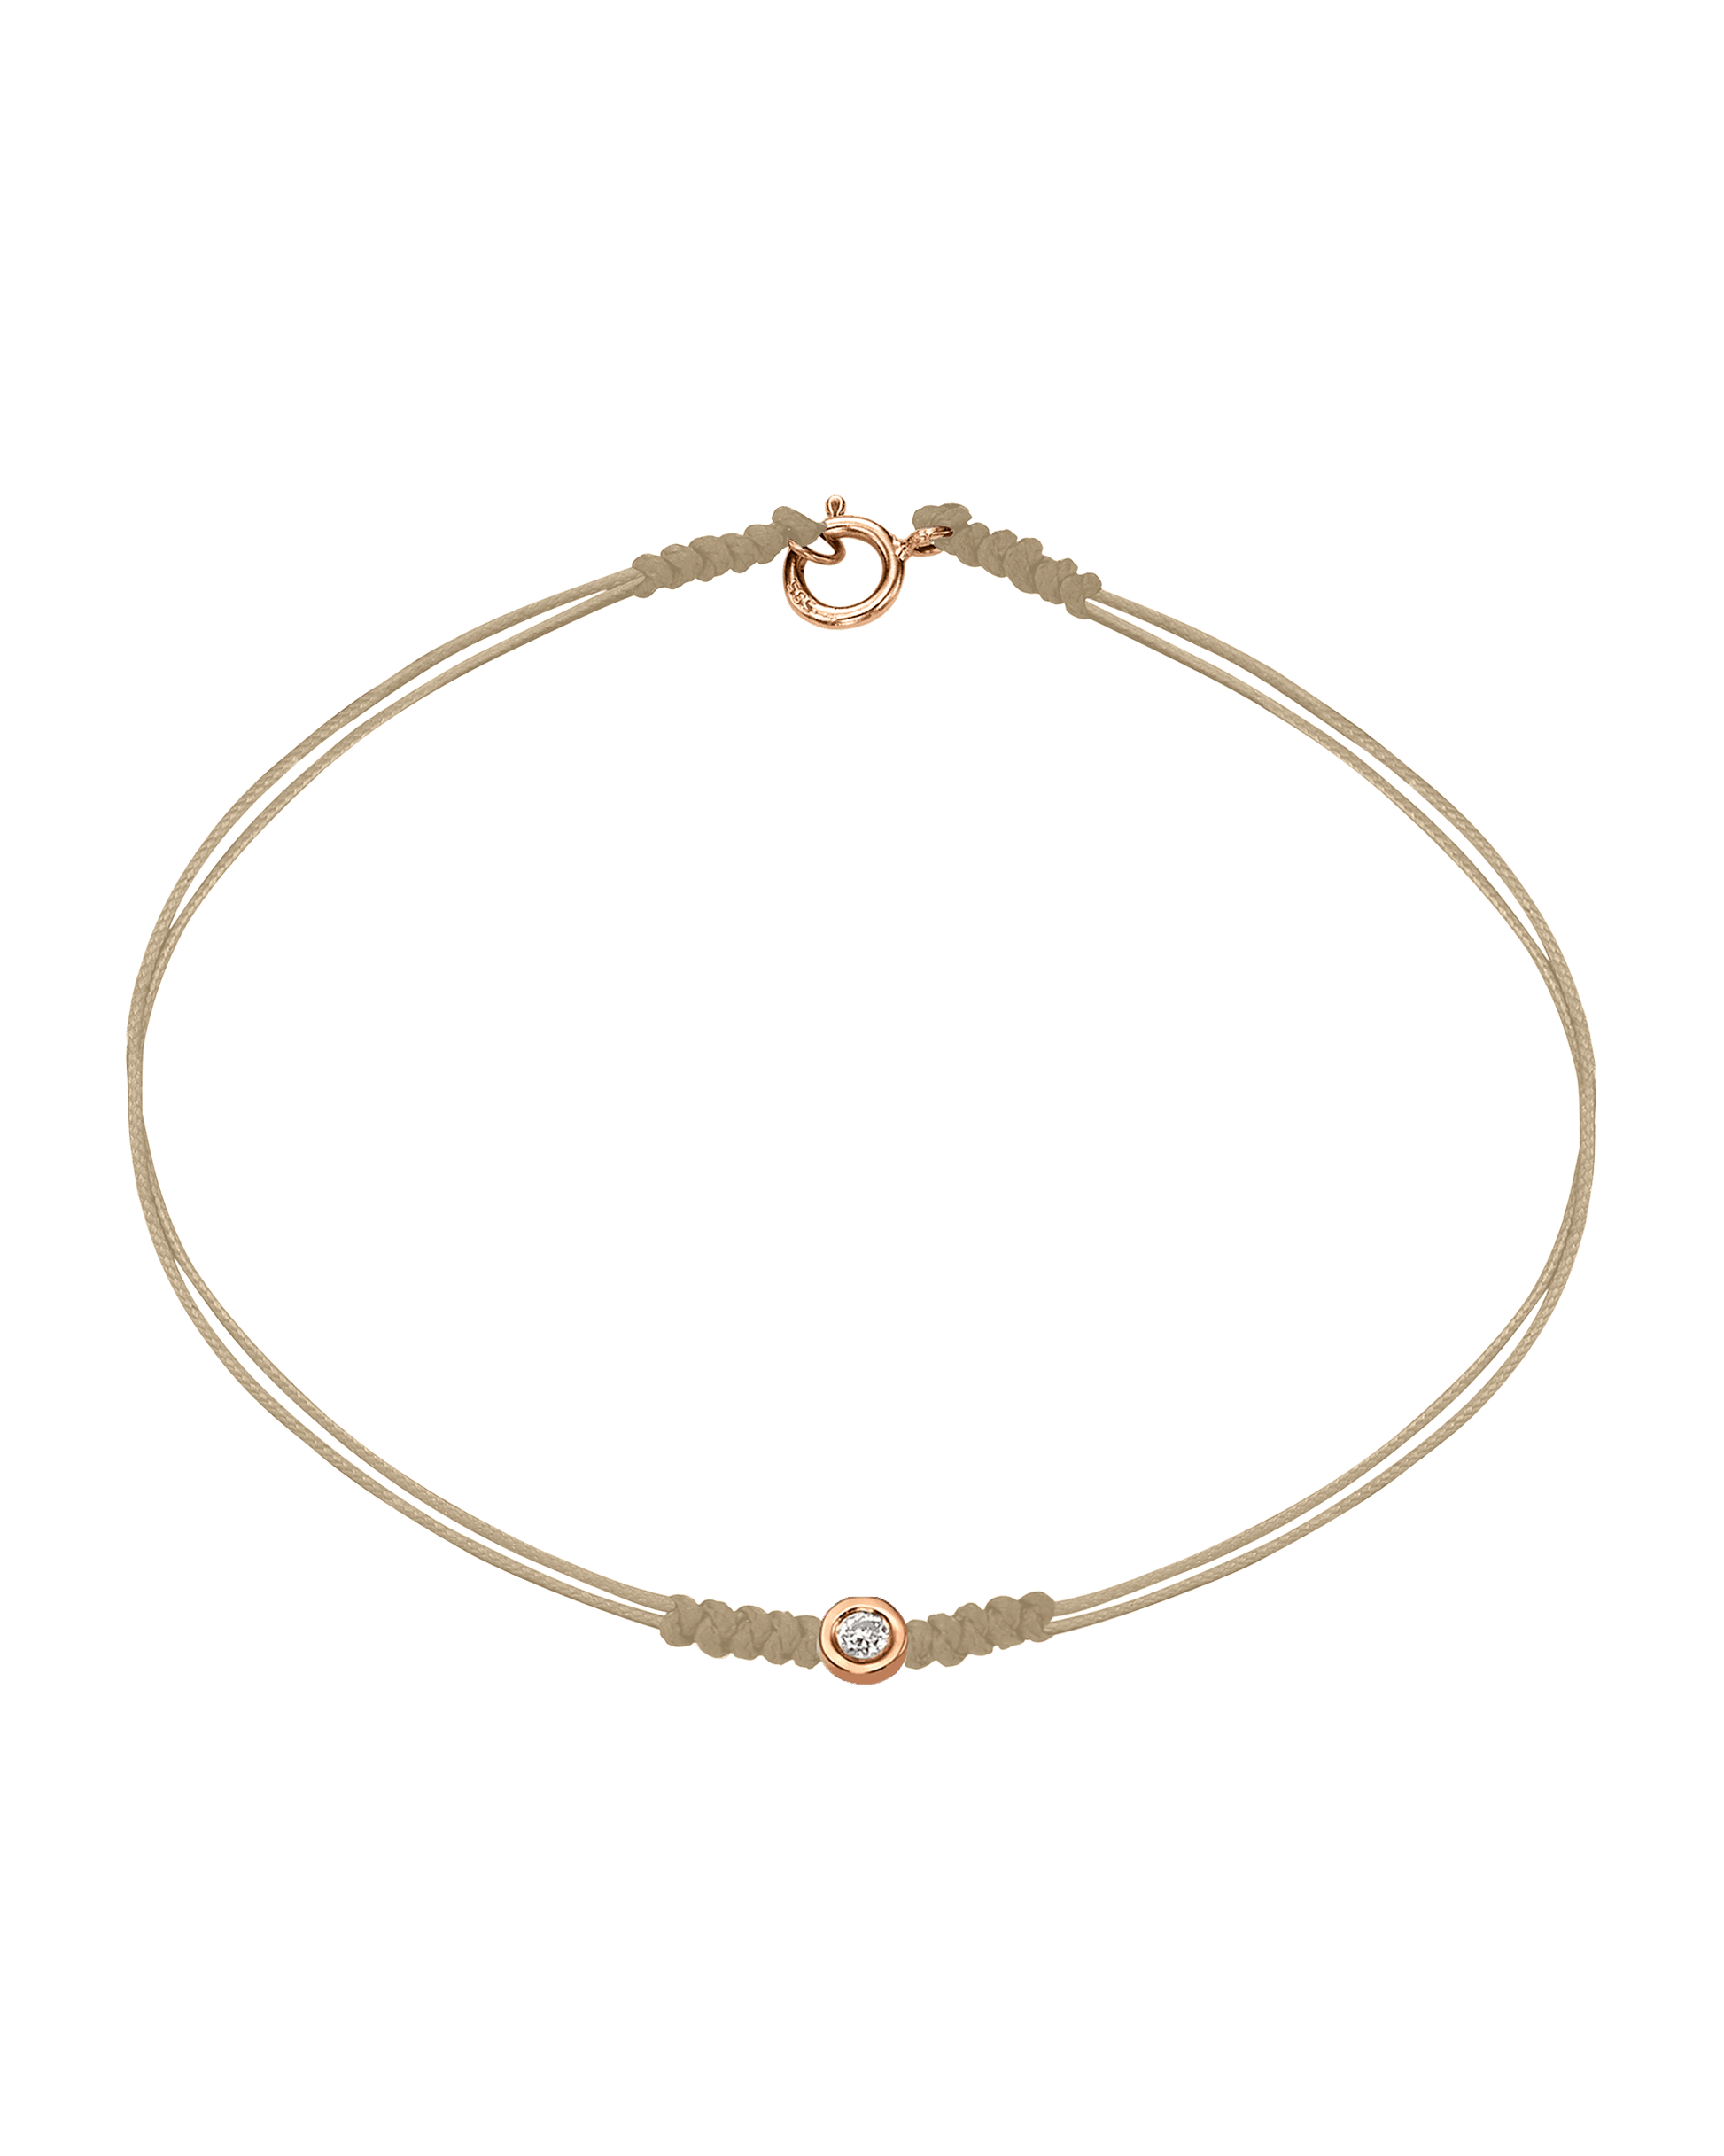 The Classic String of Love with clasp - 14K Rose Gold Bracelets 14K Solid Gold Beige Small: 0.03ct Small - 6 Inches (15.5cm)